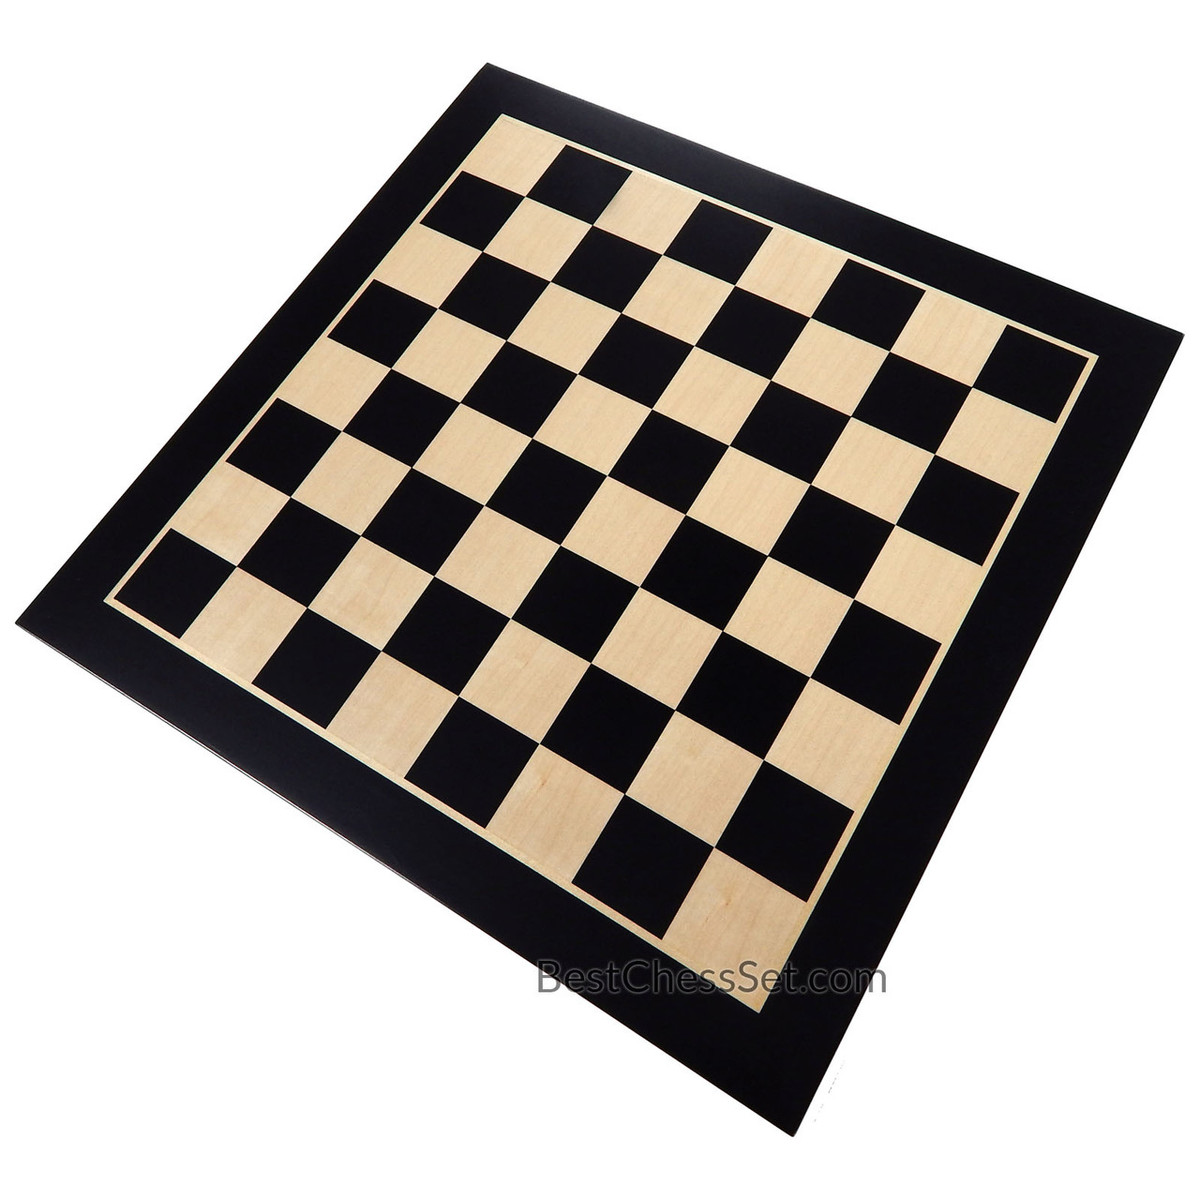 Chess 19 INCH EXTRA LARGE Maple Beech Wood Game Set Flat Inlaid BLACK BOARD ONLY 